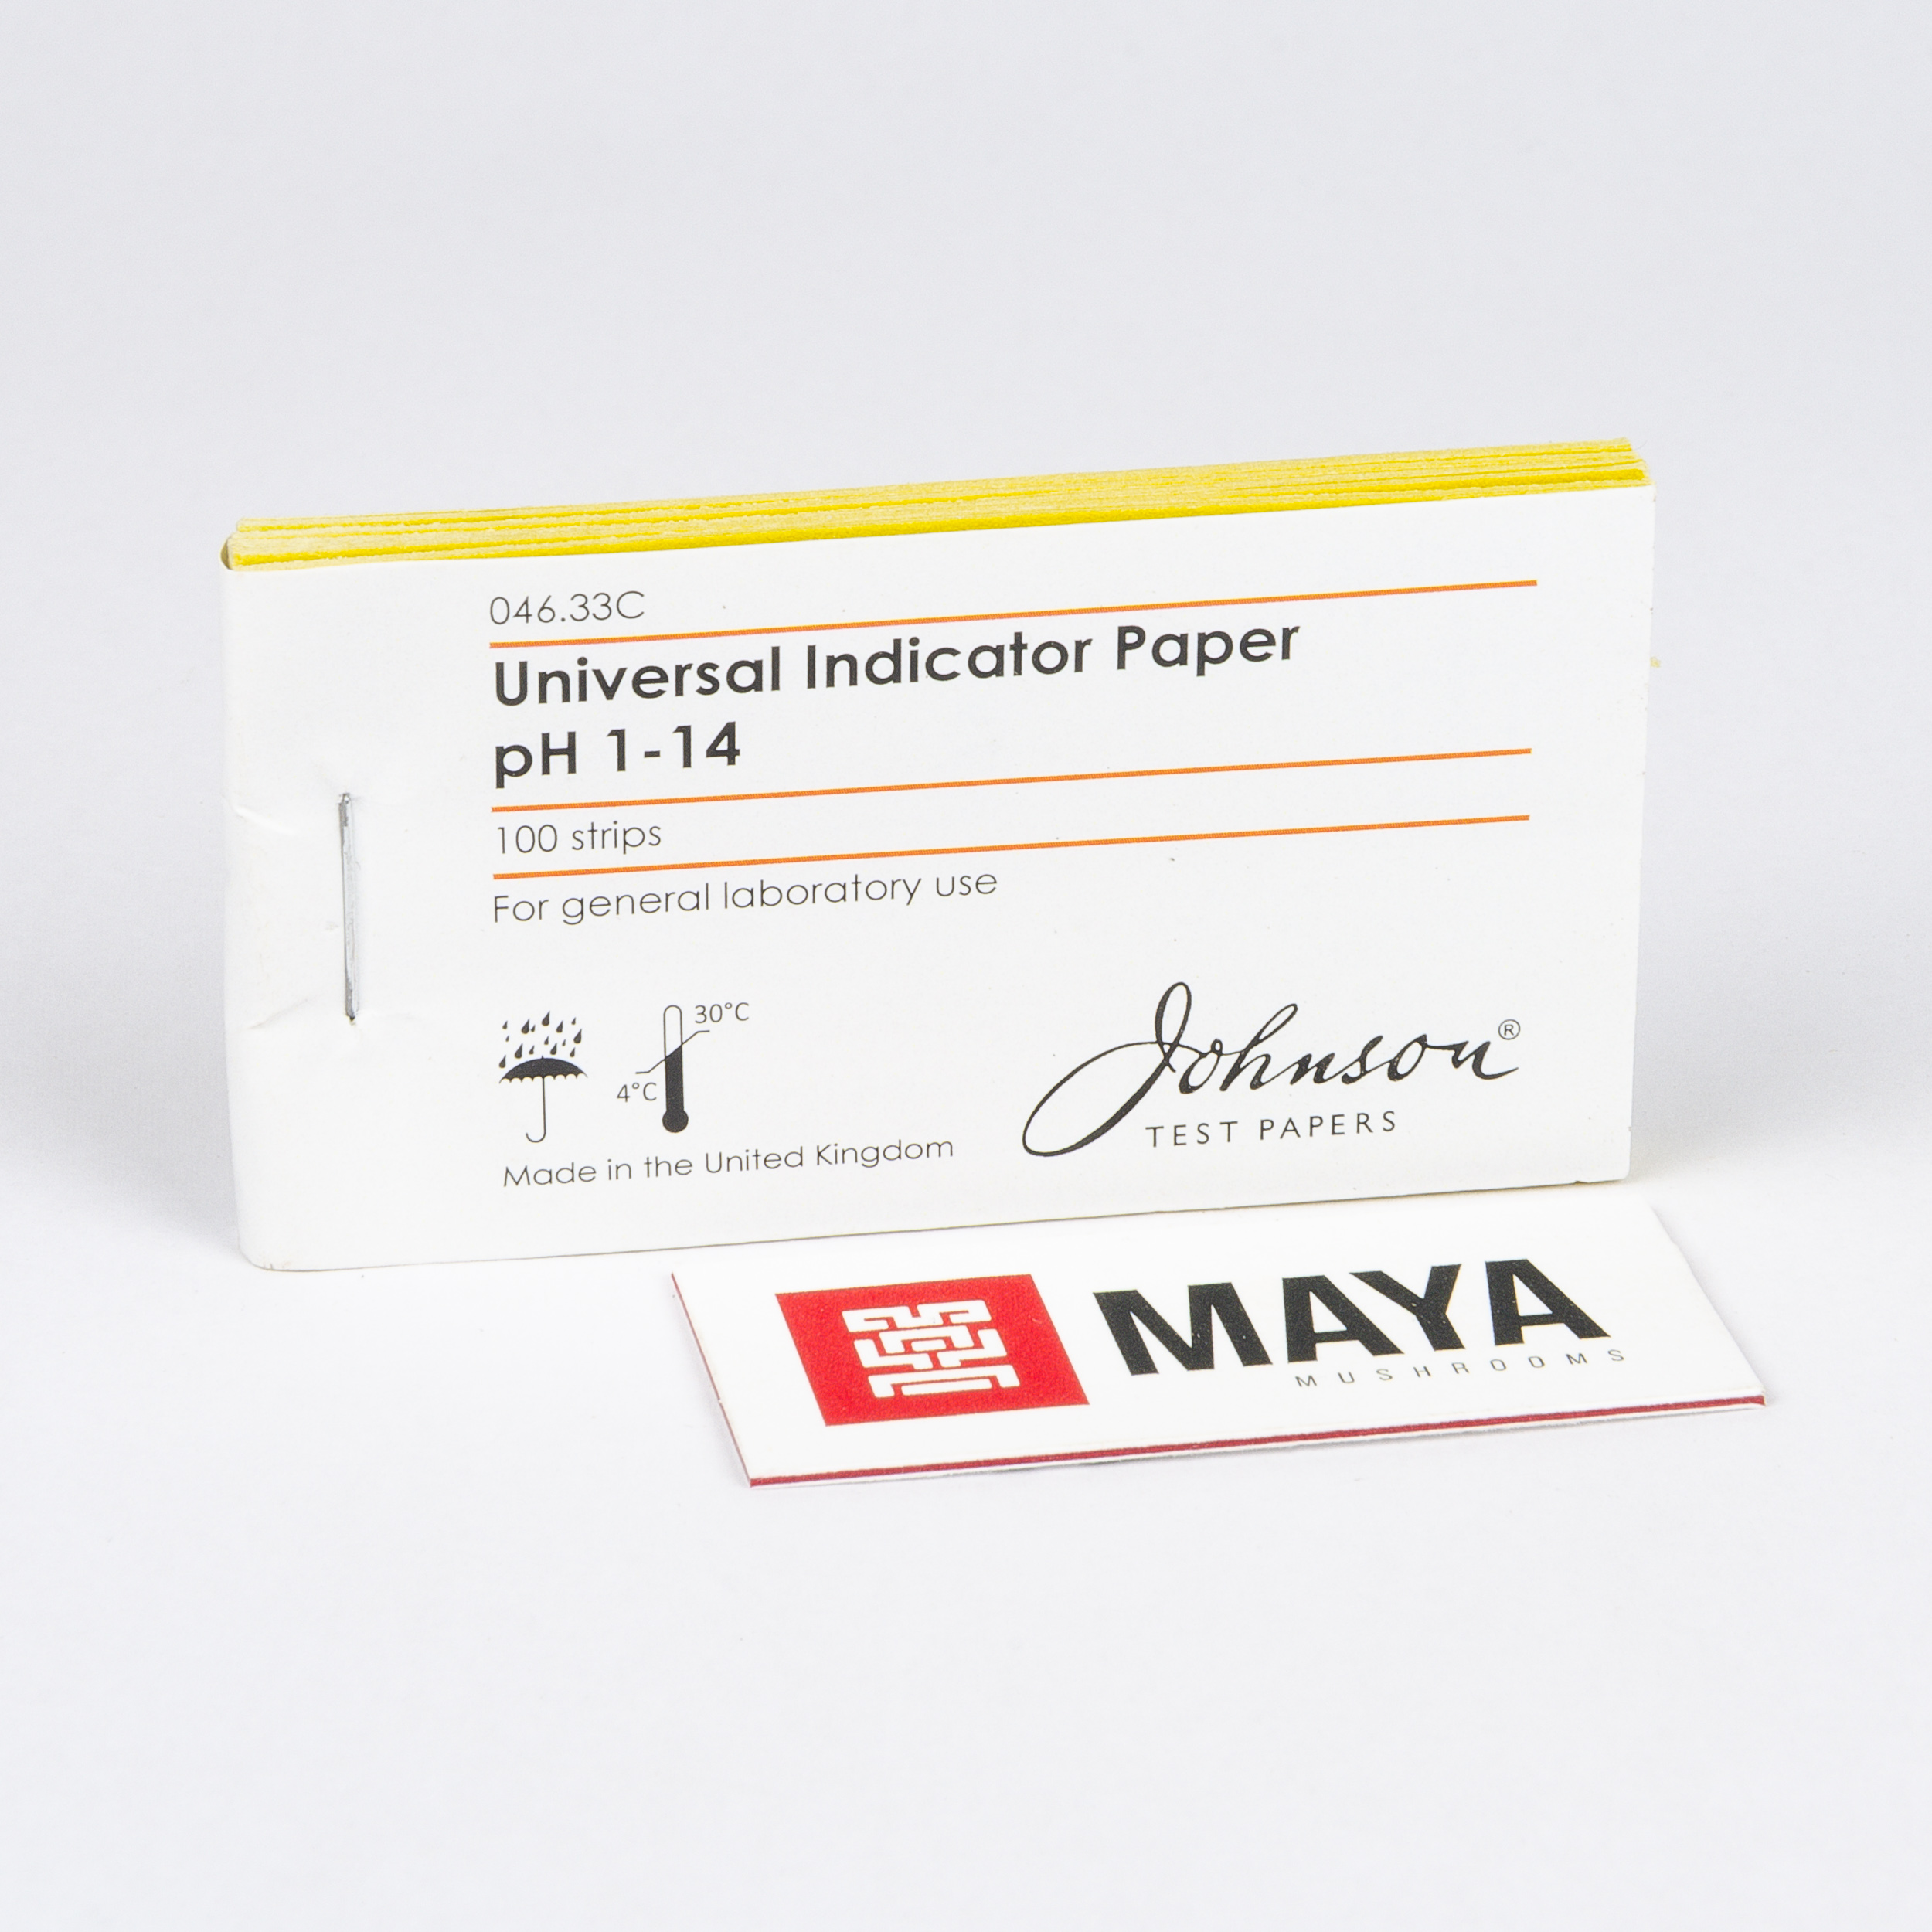 Johnson Universal Indicator Paper pH 1-14 Booklet Front